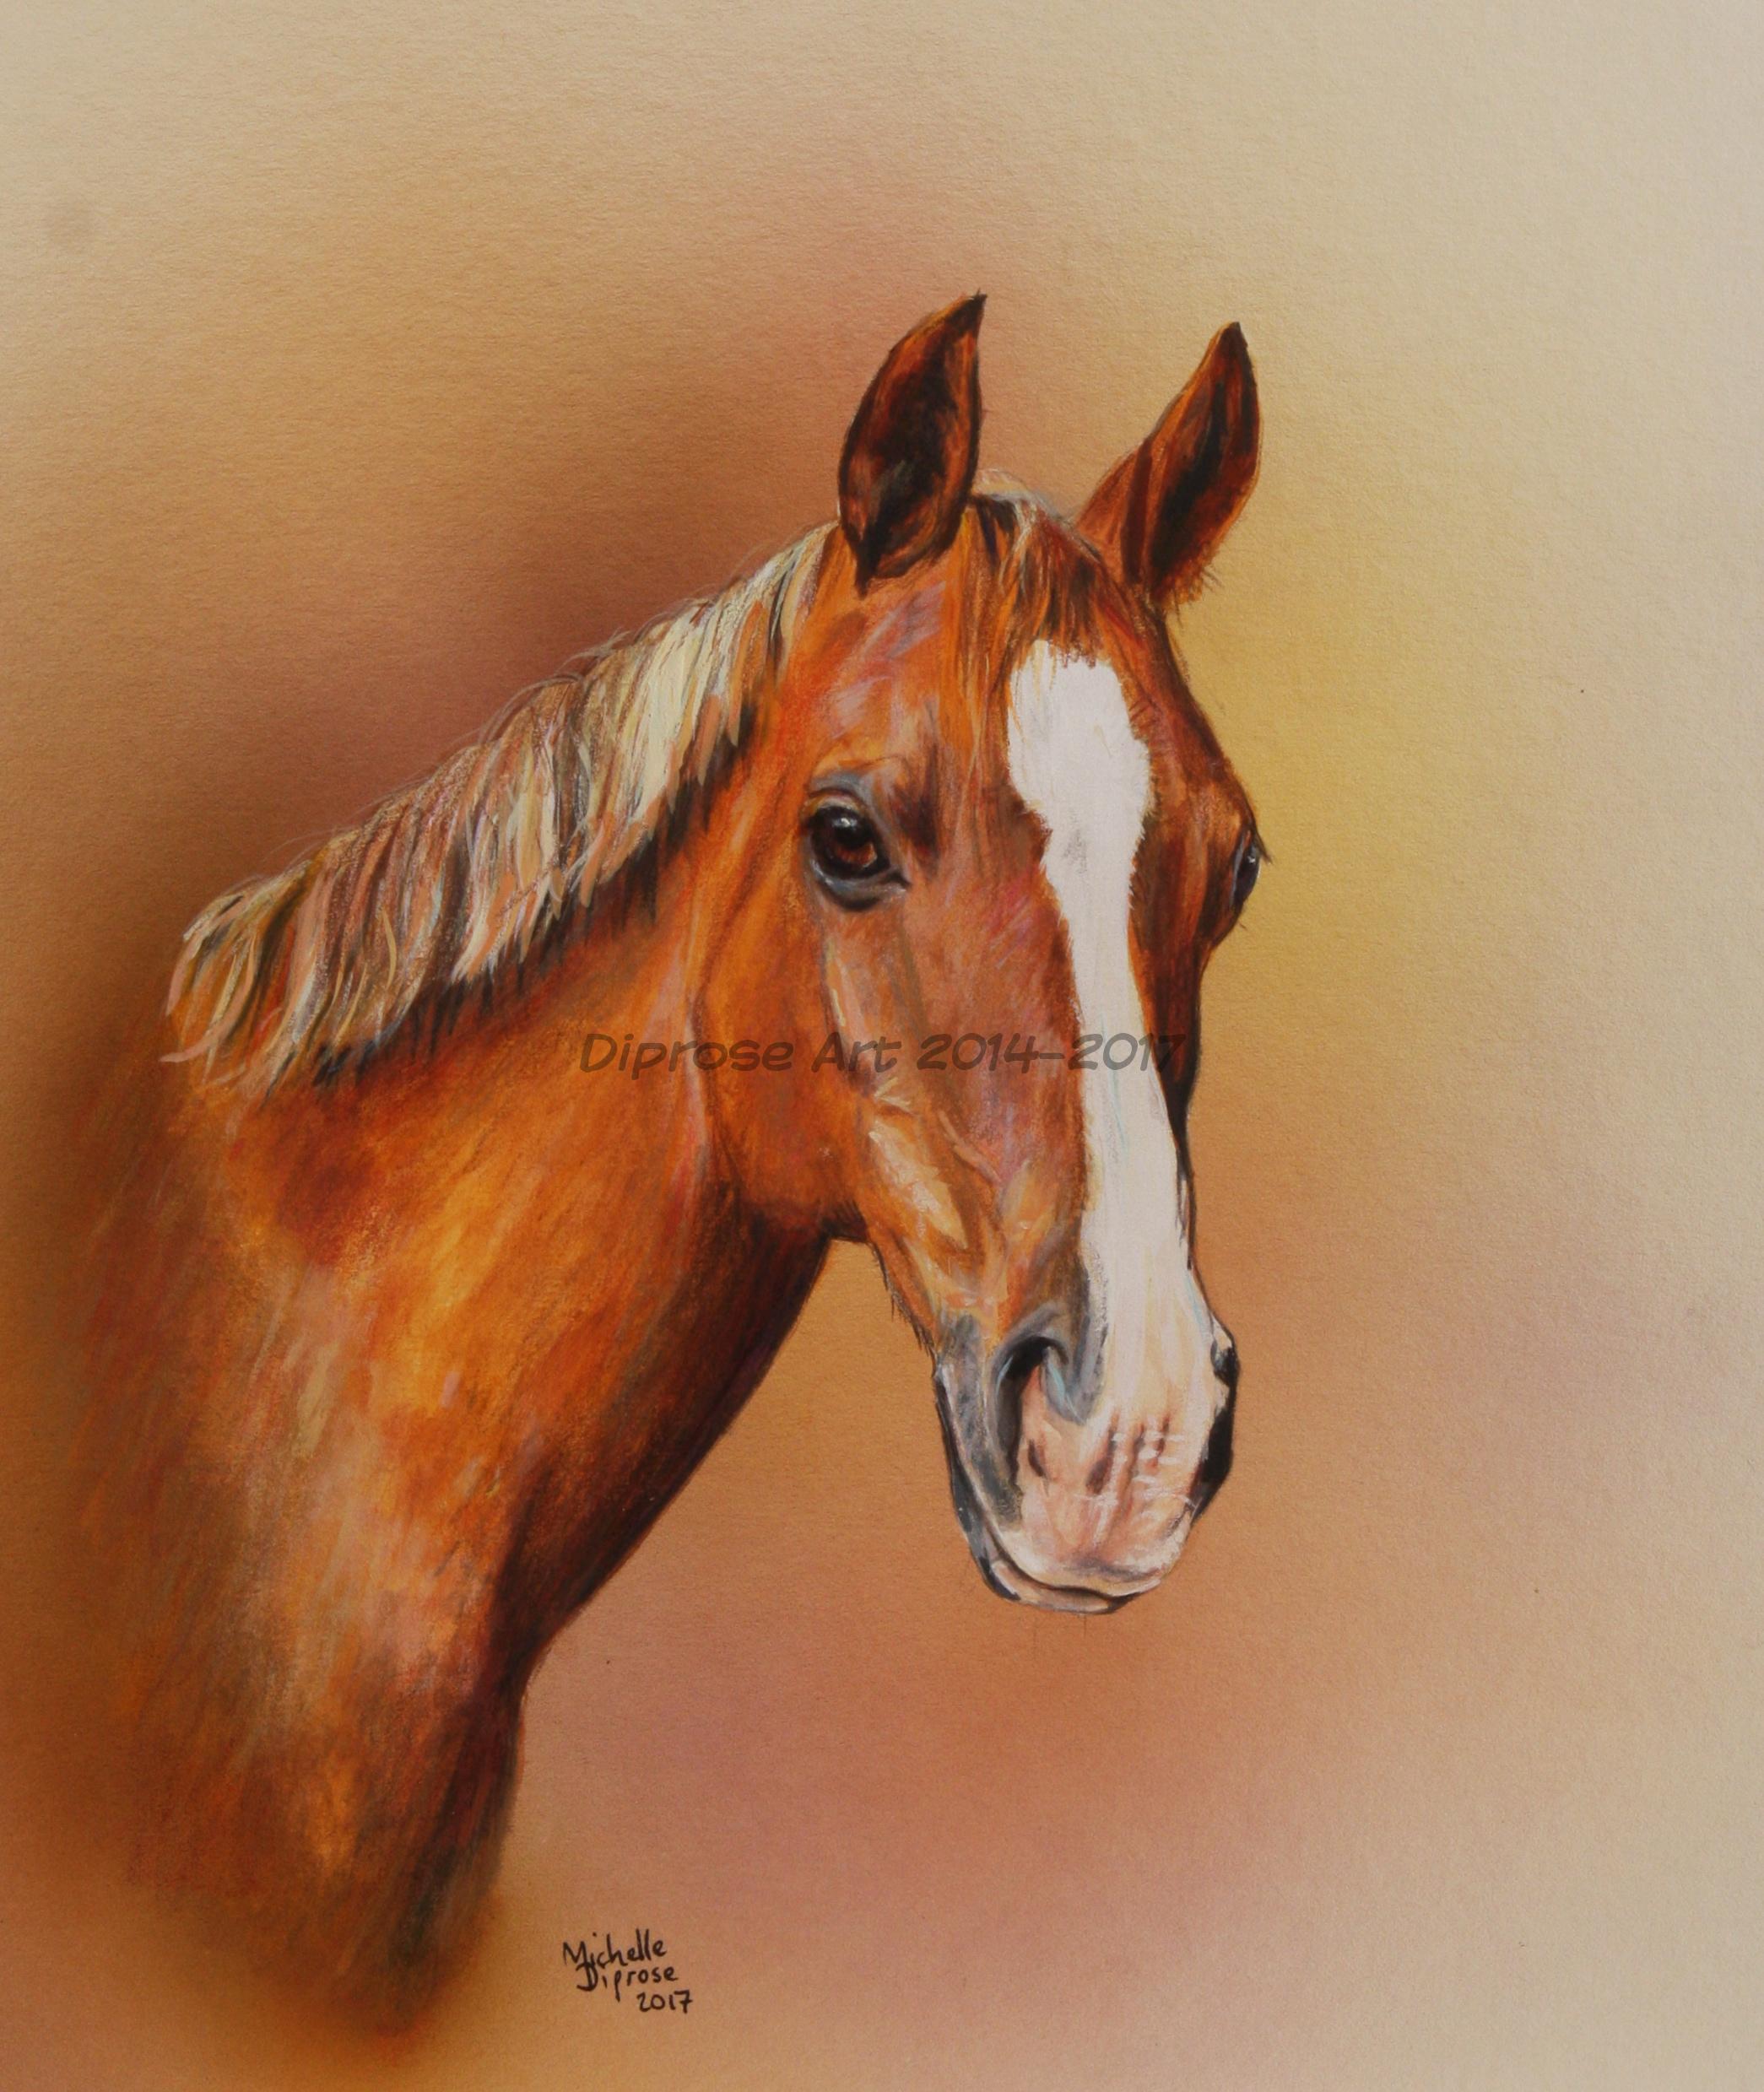 Acrylics on board - approx A4 -  horse portrait - This is Saffy and she is a lovely looking little mare - nice kind soft eye and rich chestnut coat - fun both to paint and to photograph.